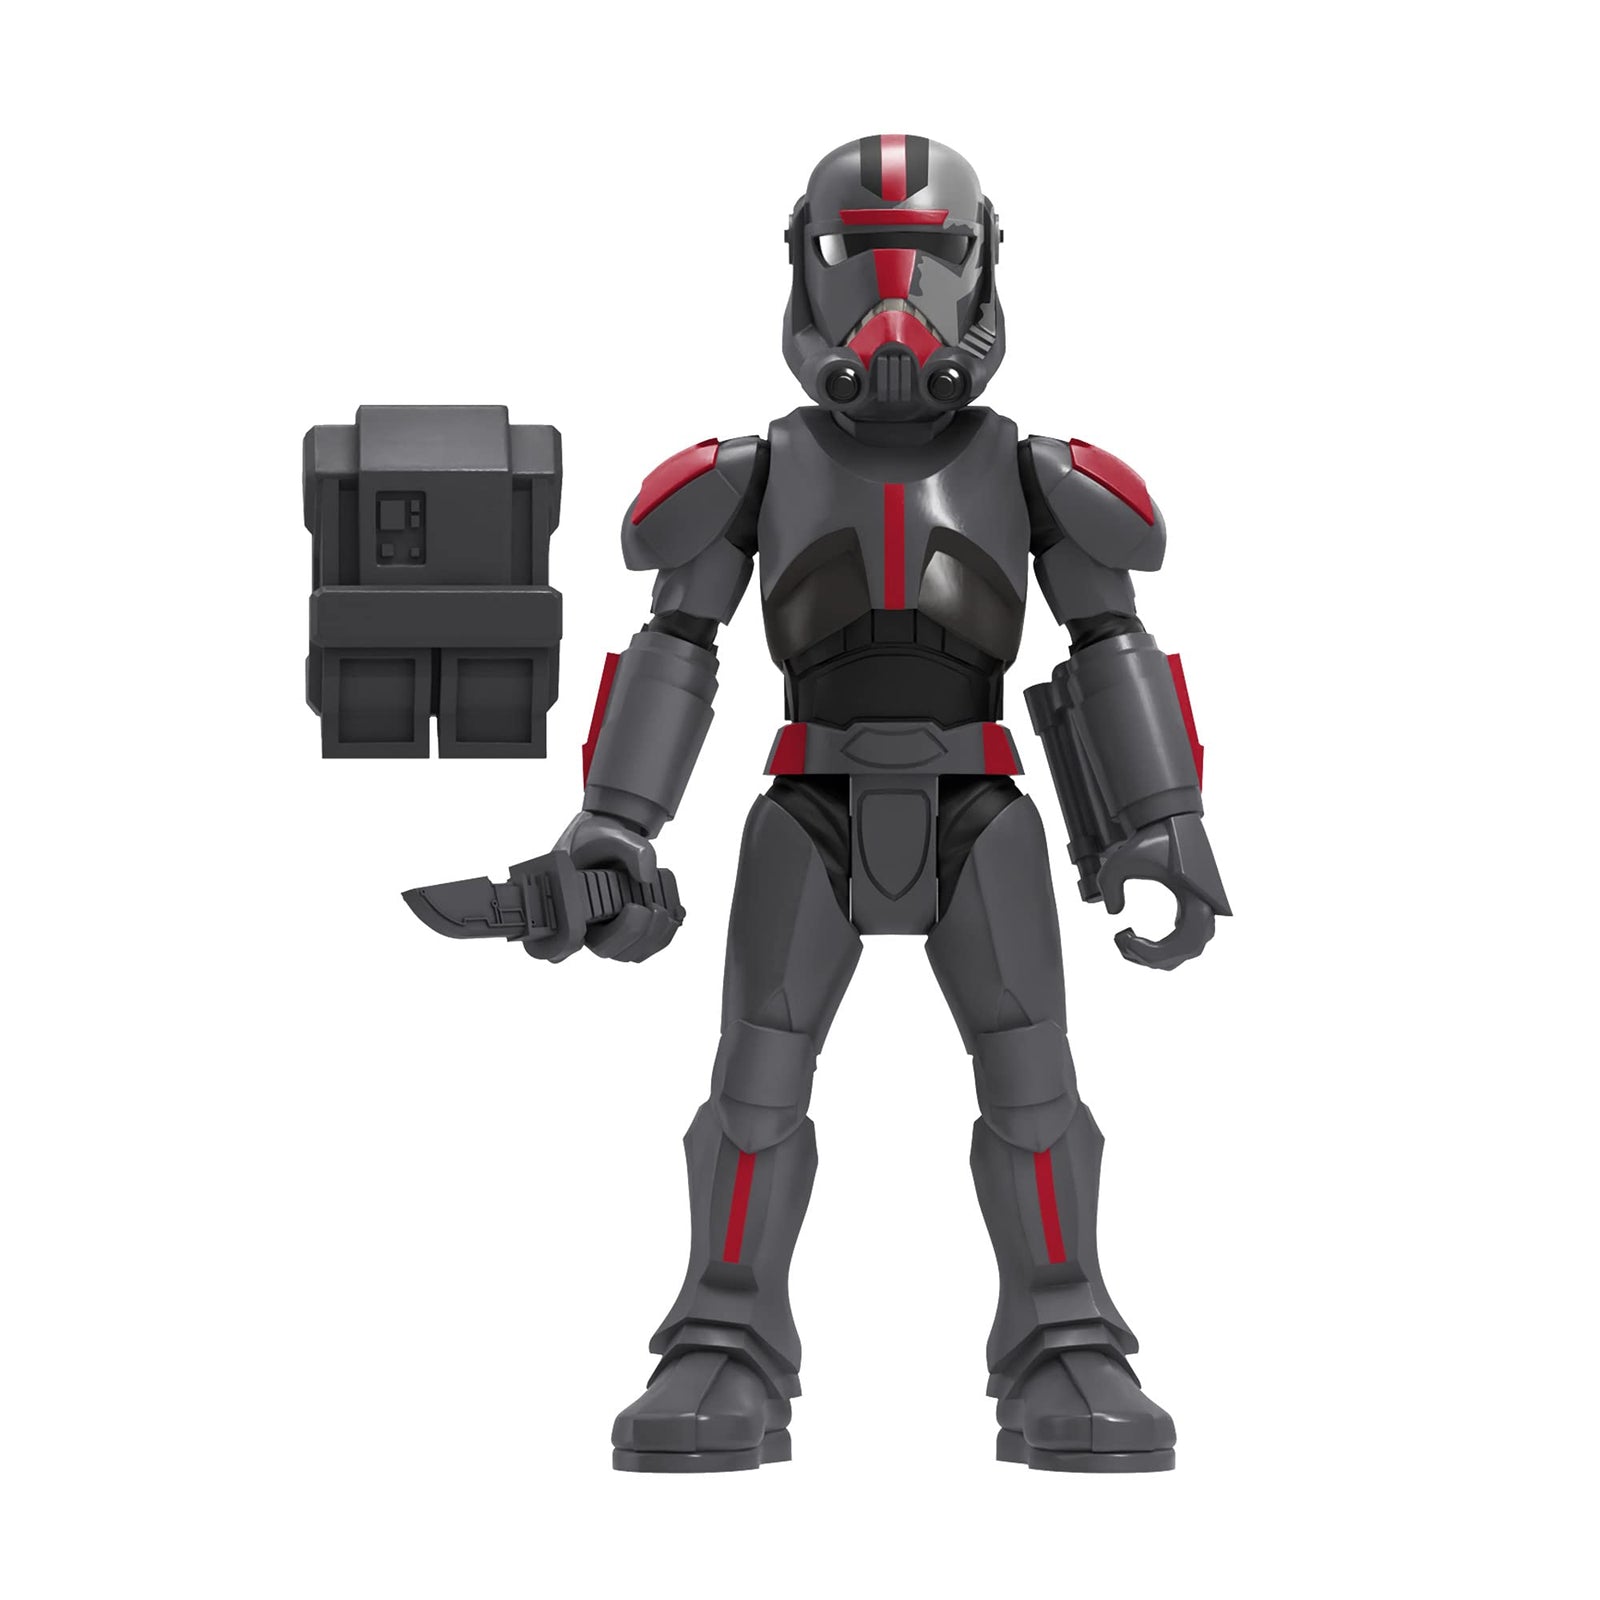 Star Wars Mission Fleet Clone Commando Clash 2.5-Inch-Scale Action Figure 4-Pack with Multiple Accessories, Toys for Kids Ages 4 and Up,F5333